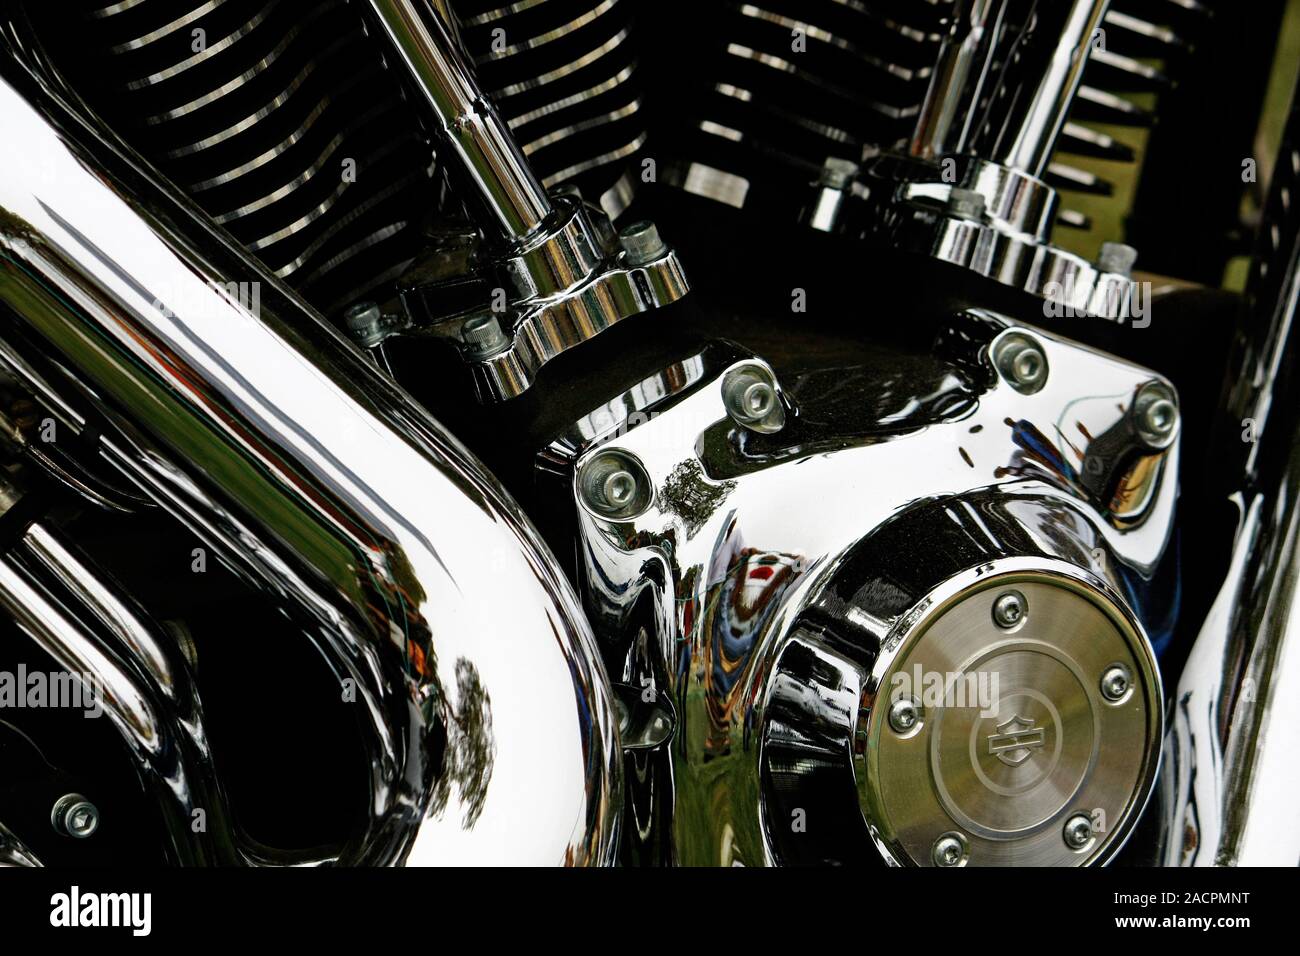 Motorcycle engine detail Stock Photo